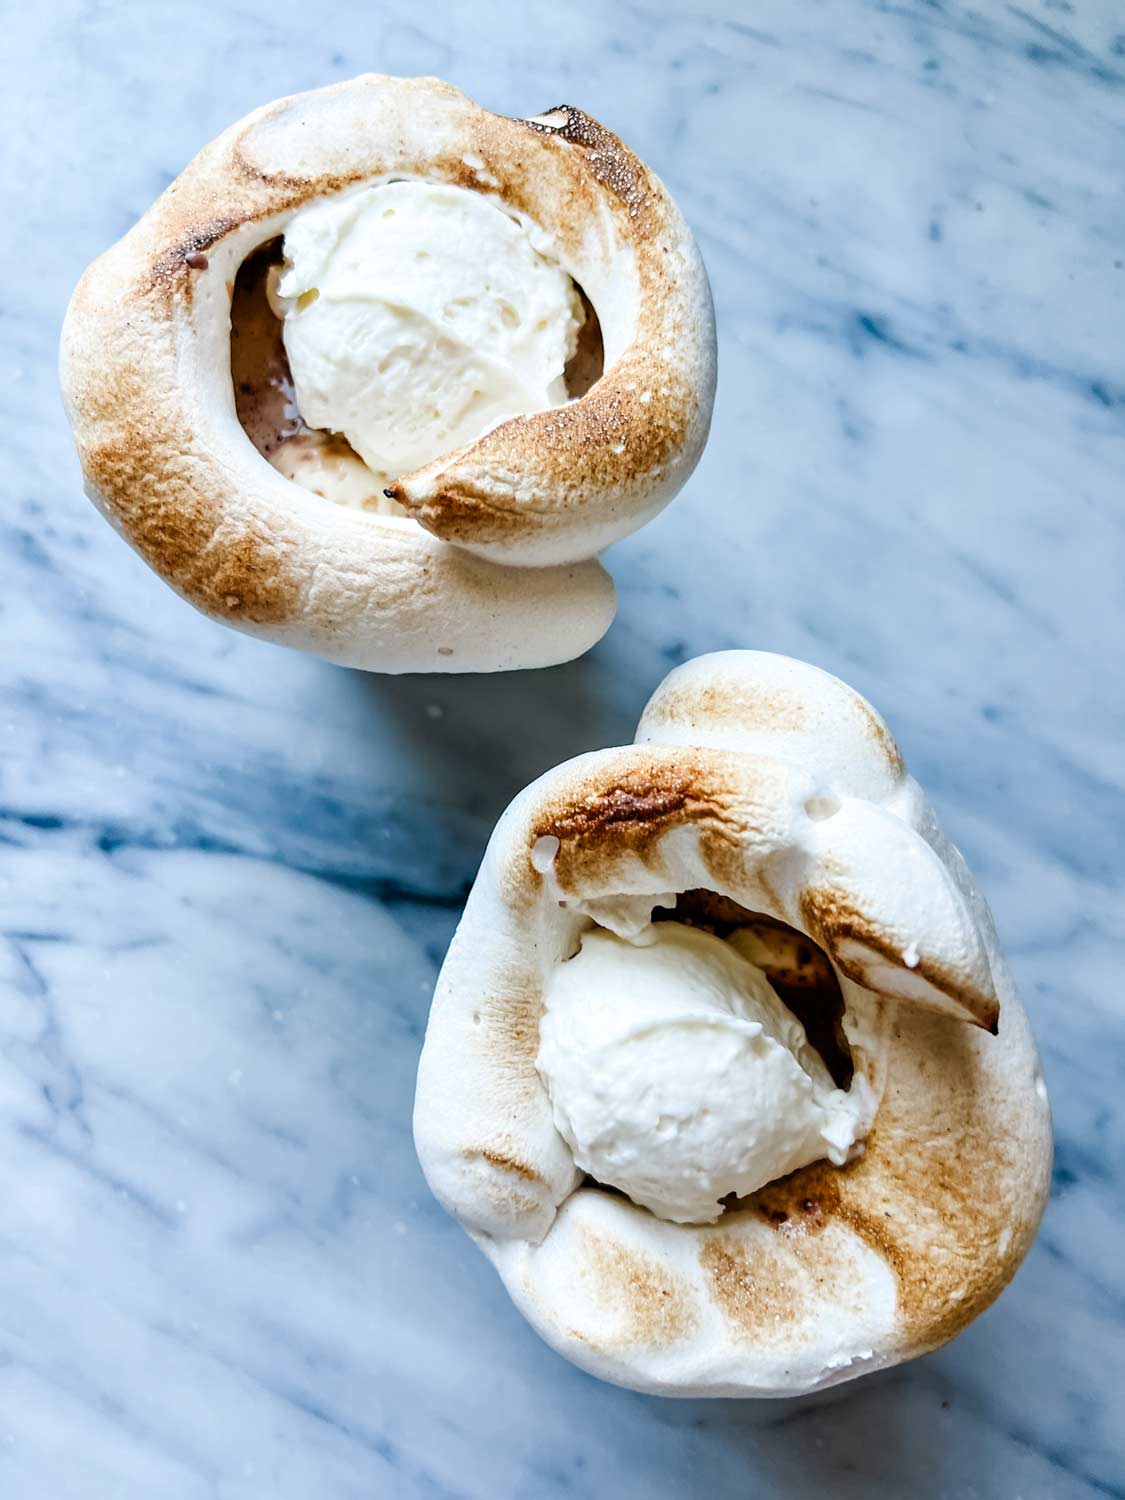 These Mini Meringues Are the Perfect Hot Chocolate Topper